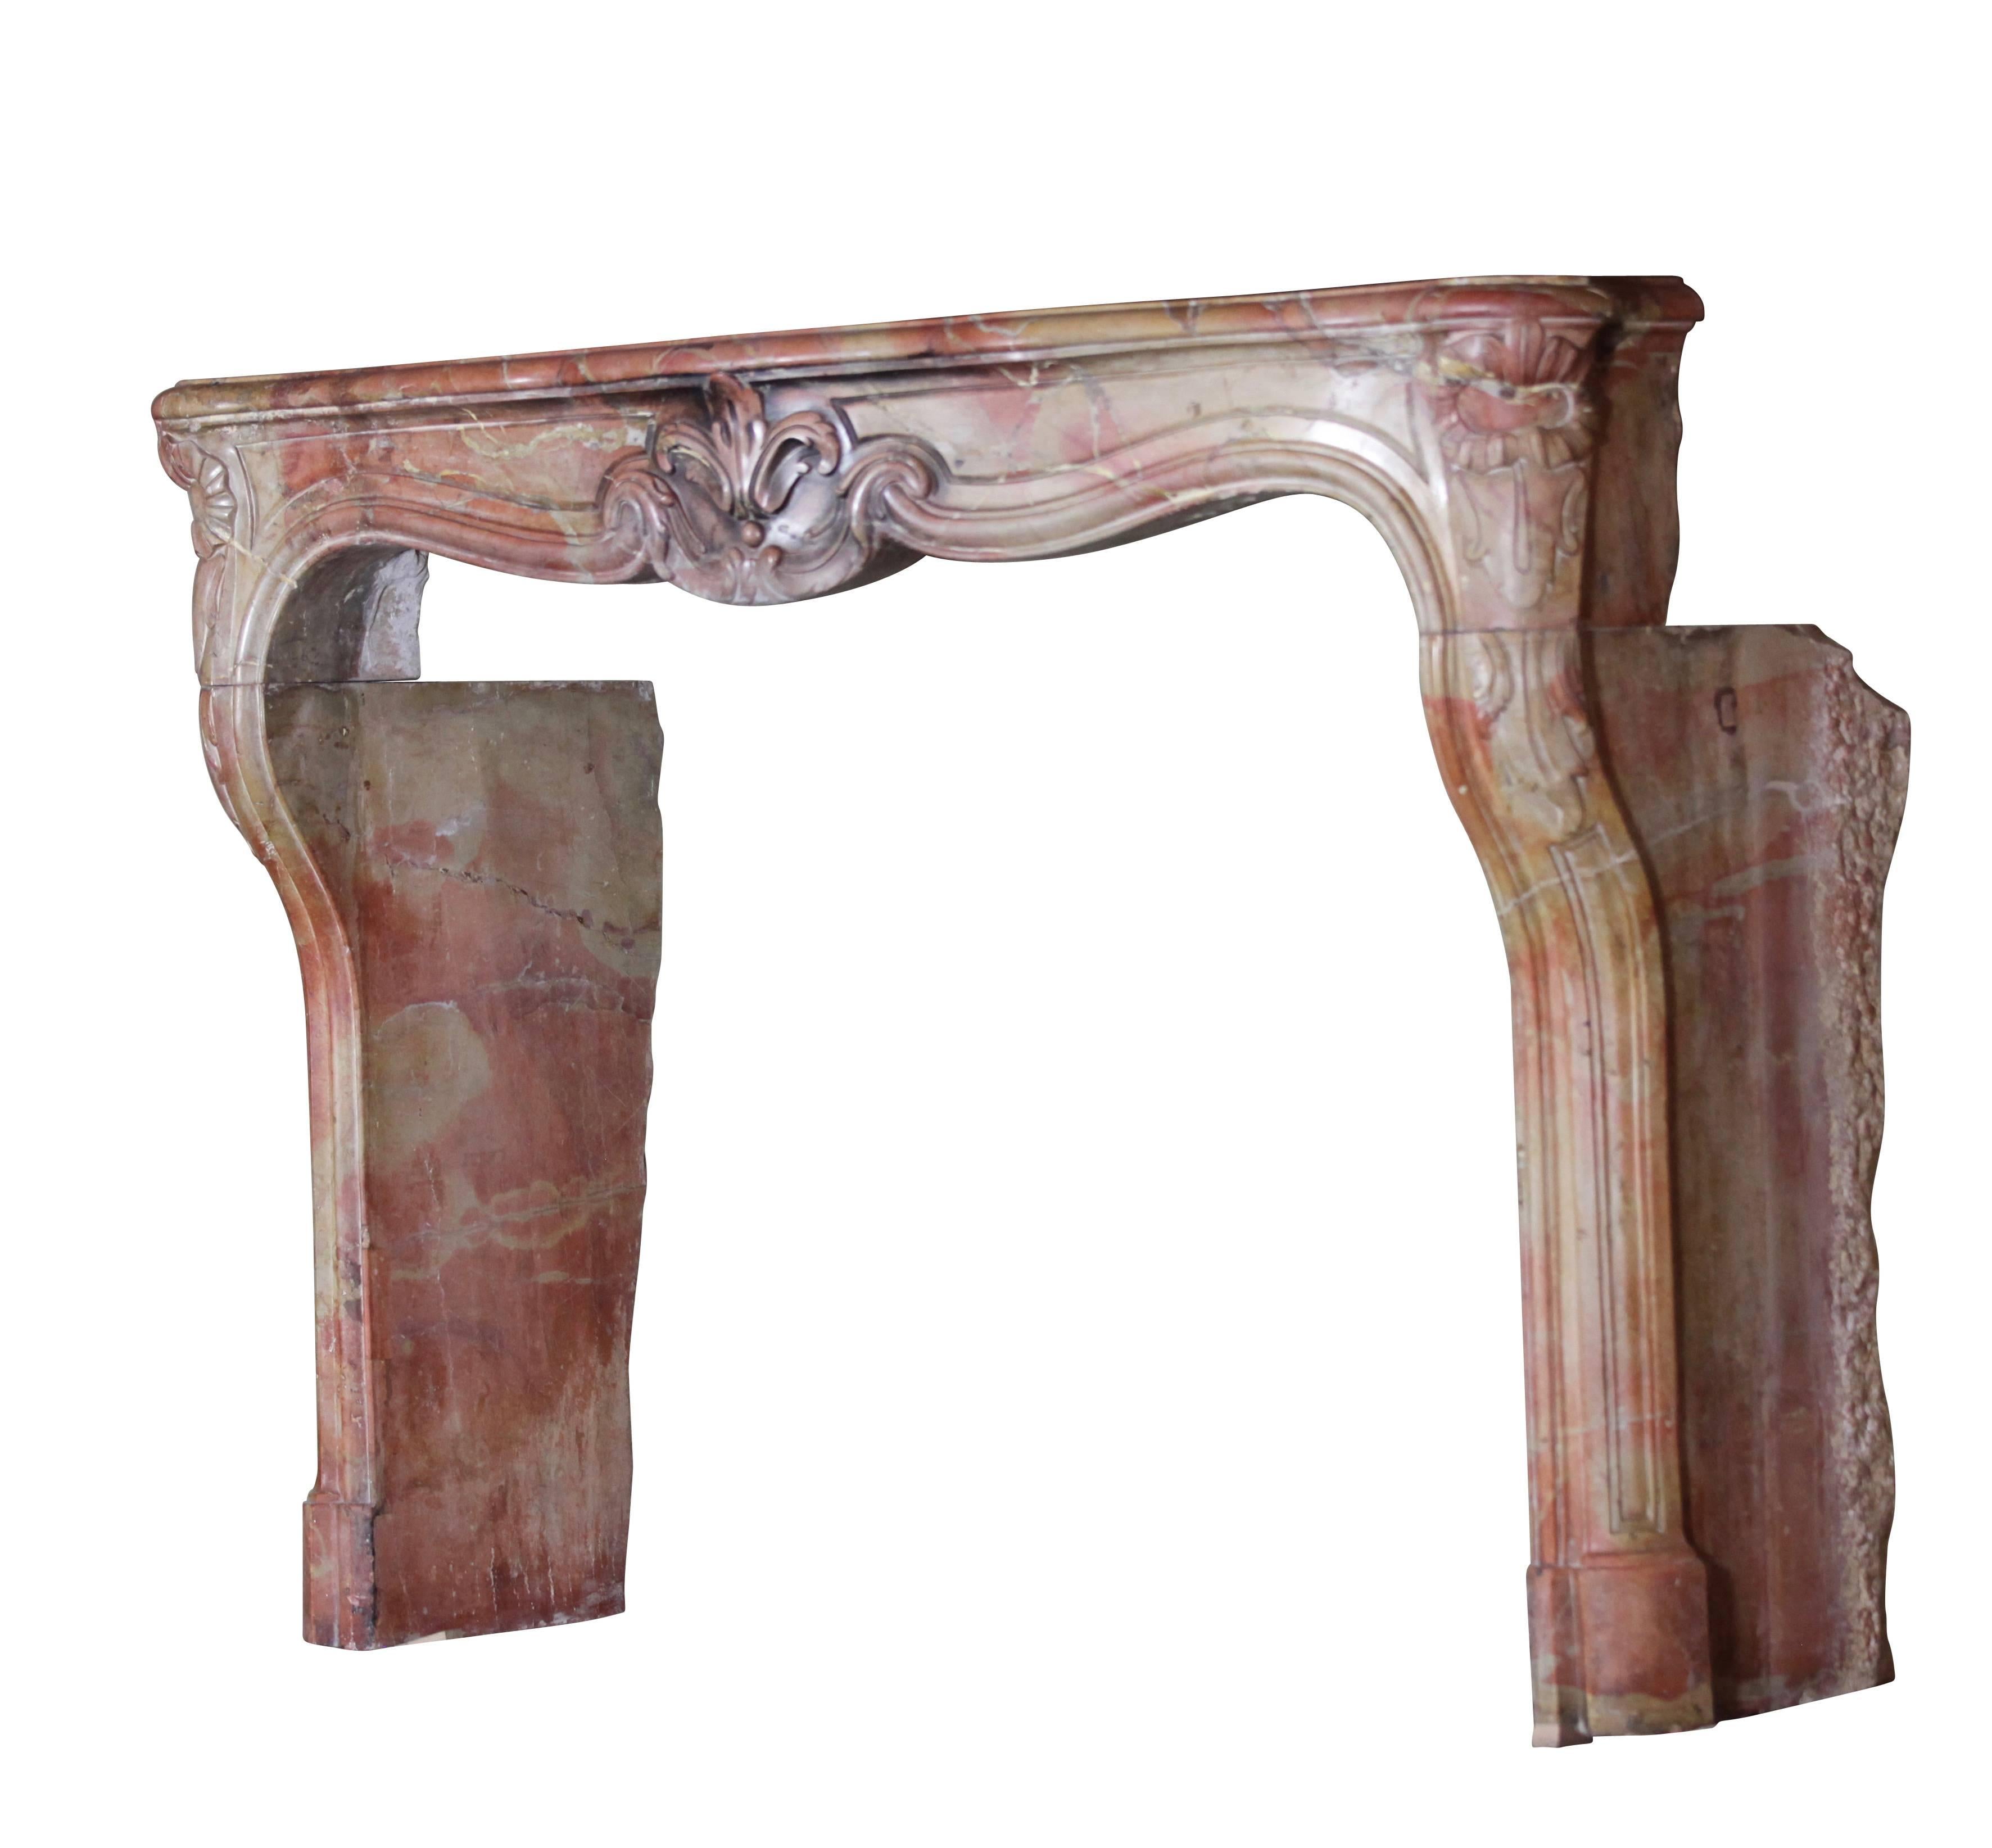 This fireplace surround with magnificent veining and not broken is from the Burgundy region. It has a country look although it can be used in all different kind of interior design since the design of it. An important piece with a nice